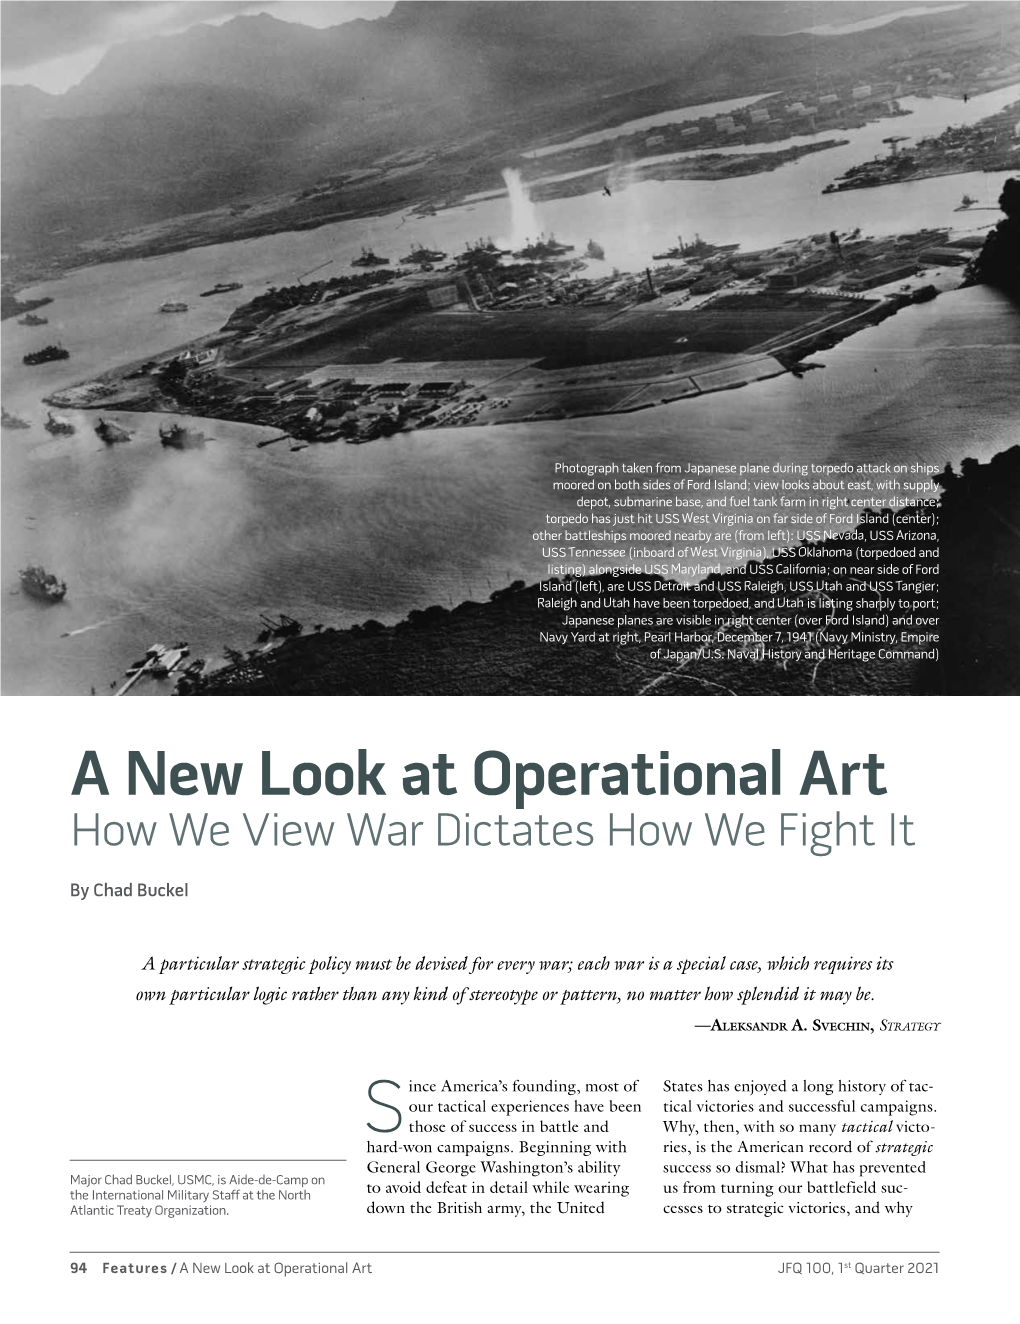 A New Look at Operational Art: How We View War Dictates How We